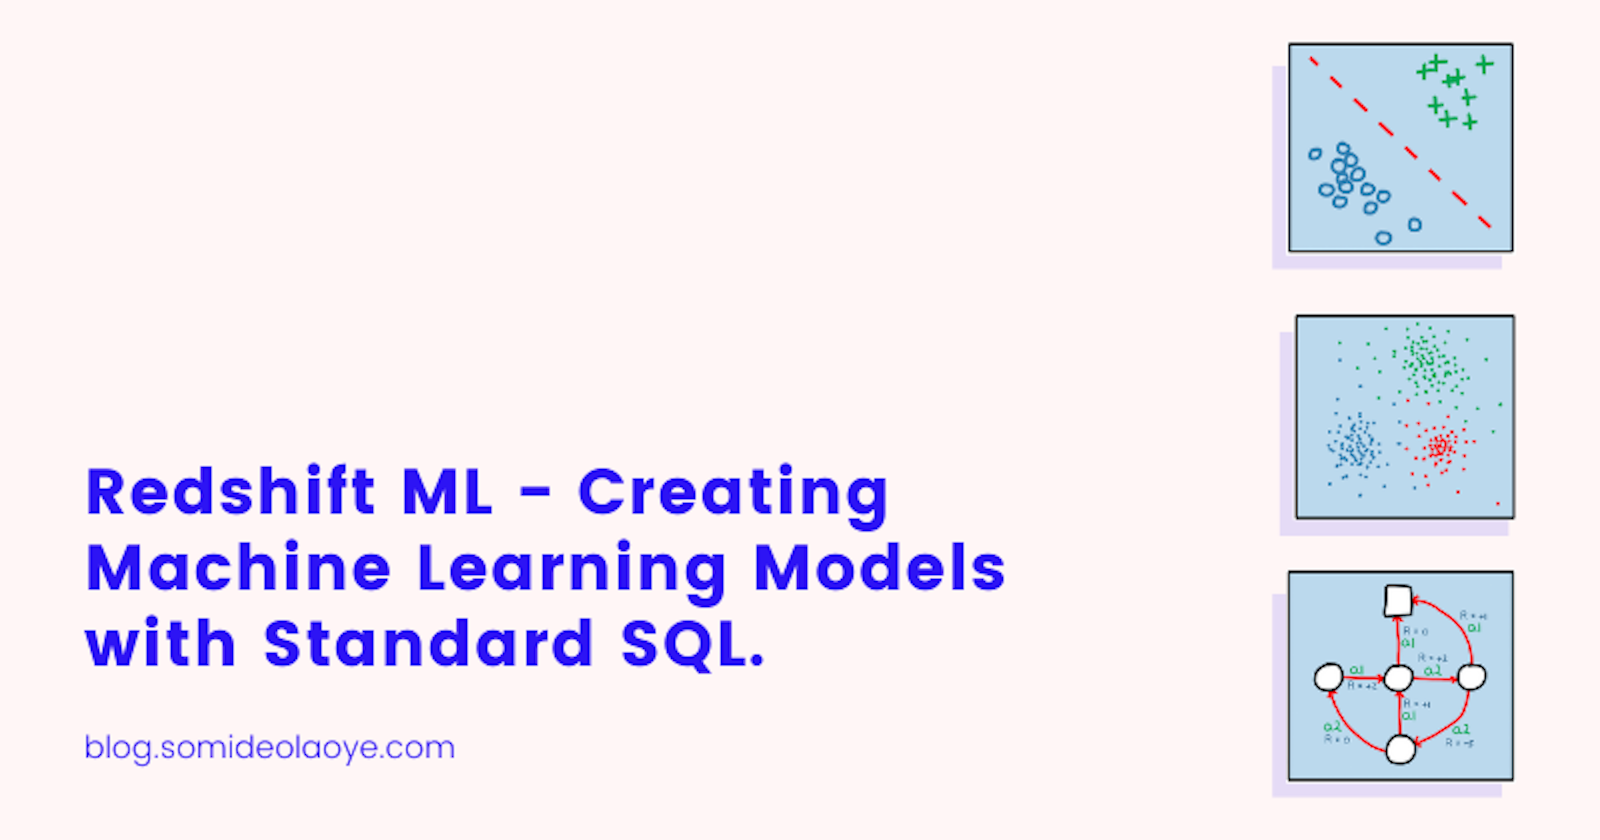 Amazon Redshift ML - Creating Machine Learning Models with Standard SQL.